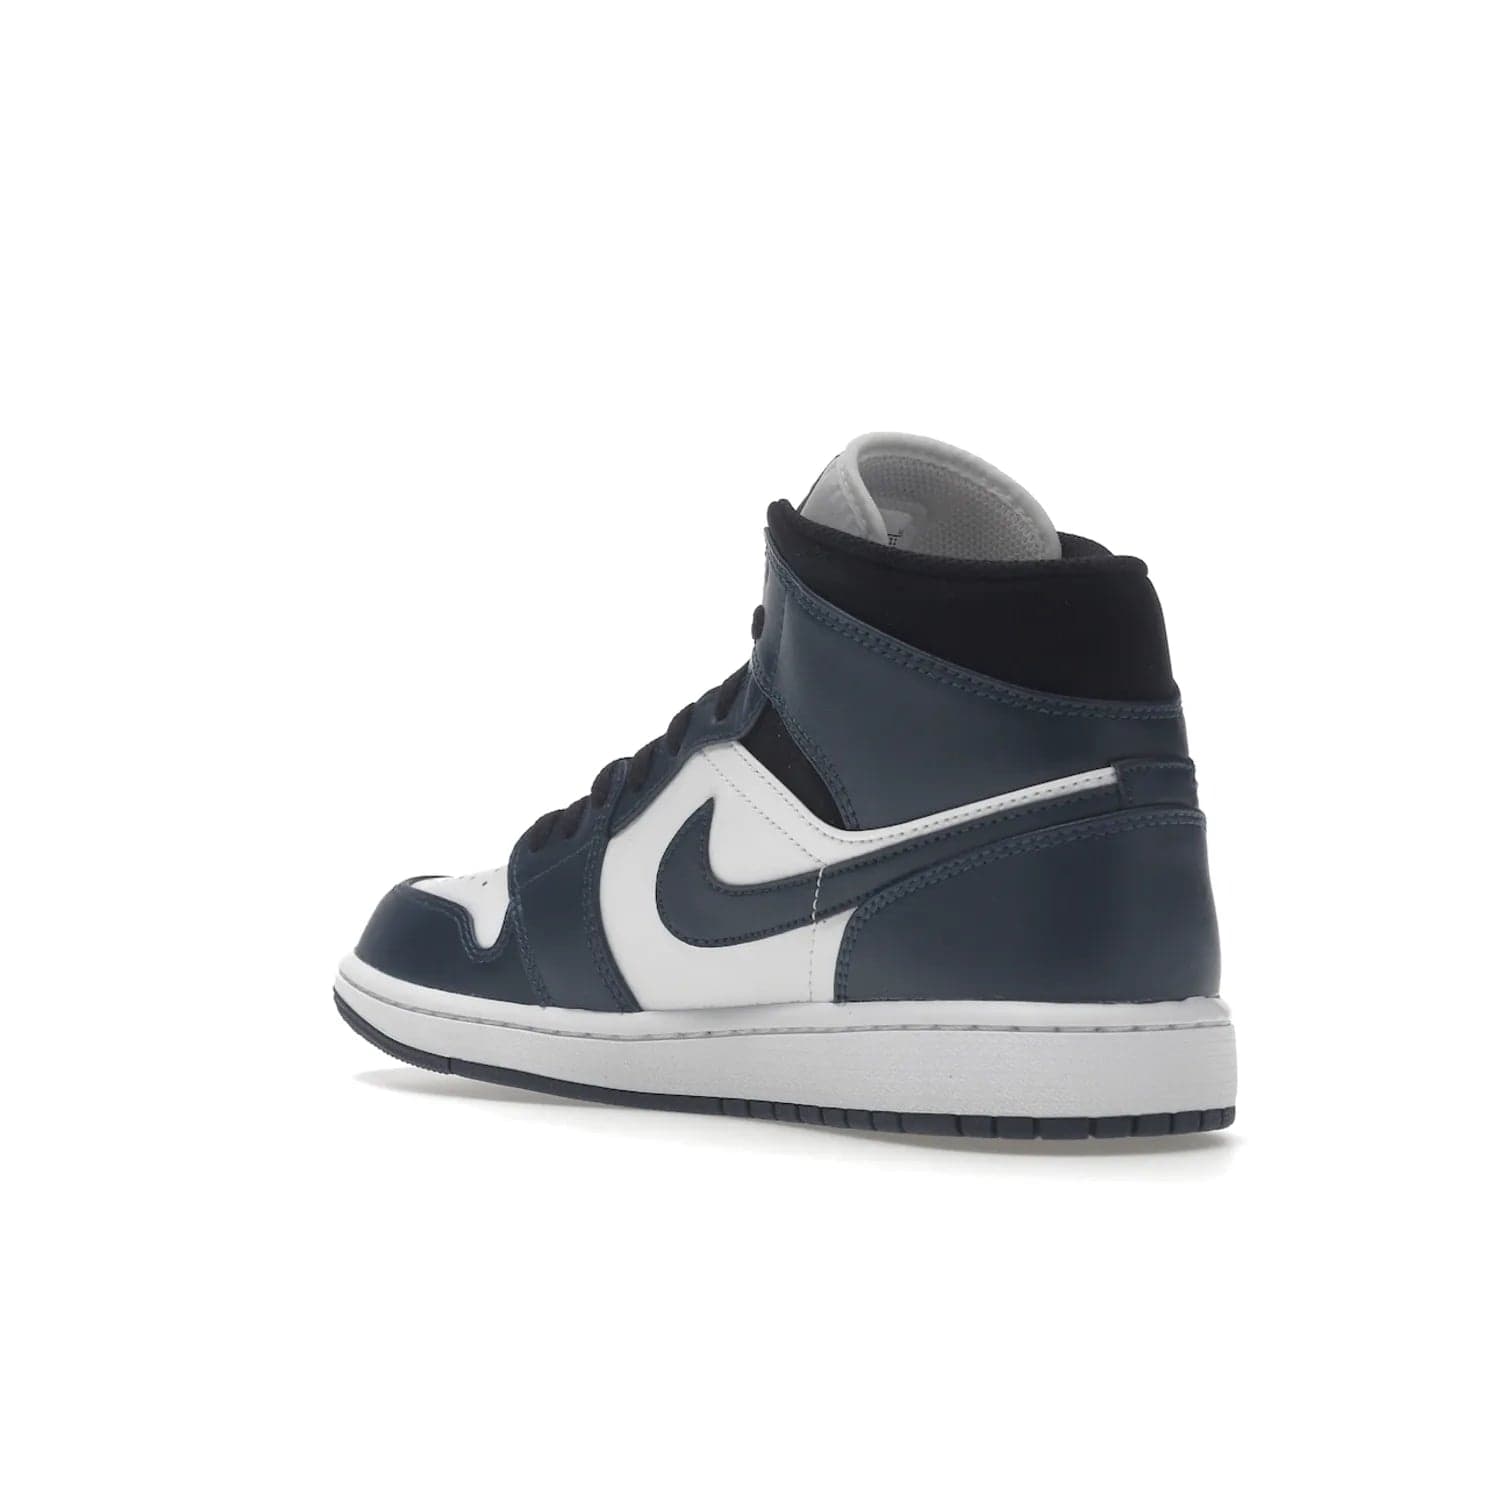 Jordan 1 Mid Armory Navy - Image 24 - Only at www.BallersClubKickz.com - The Jordan 1 Mid Armory Navy: classic basketball sneaker with soft white leather upper, deep navy blue overlays, and black leather ankle detailing. Iconic style with Jordan Wings logo and Jumpman label.